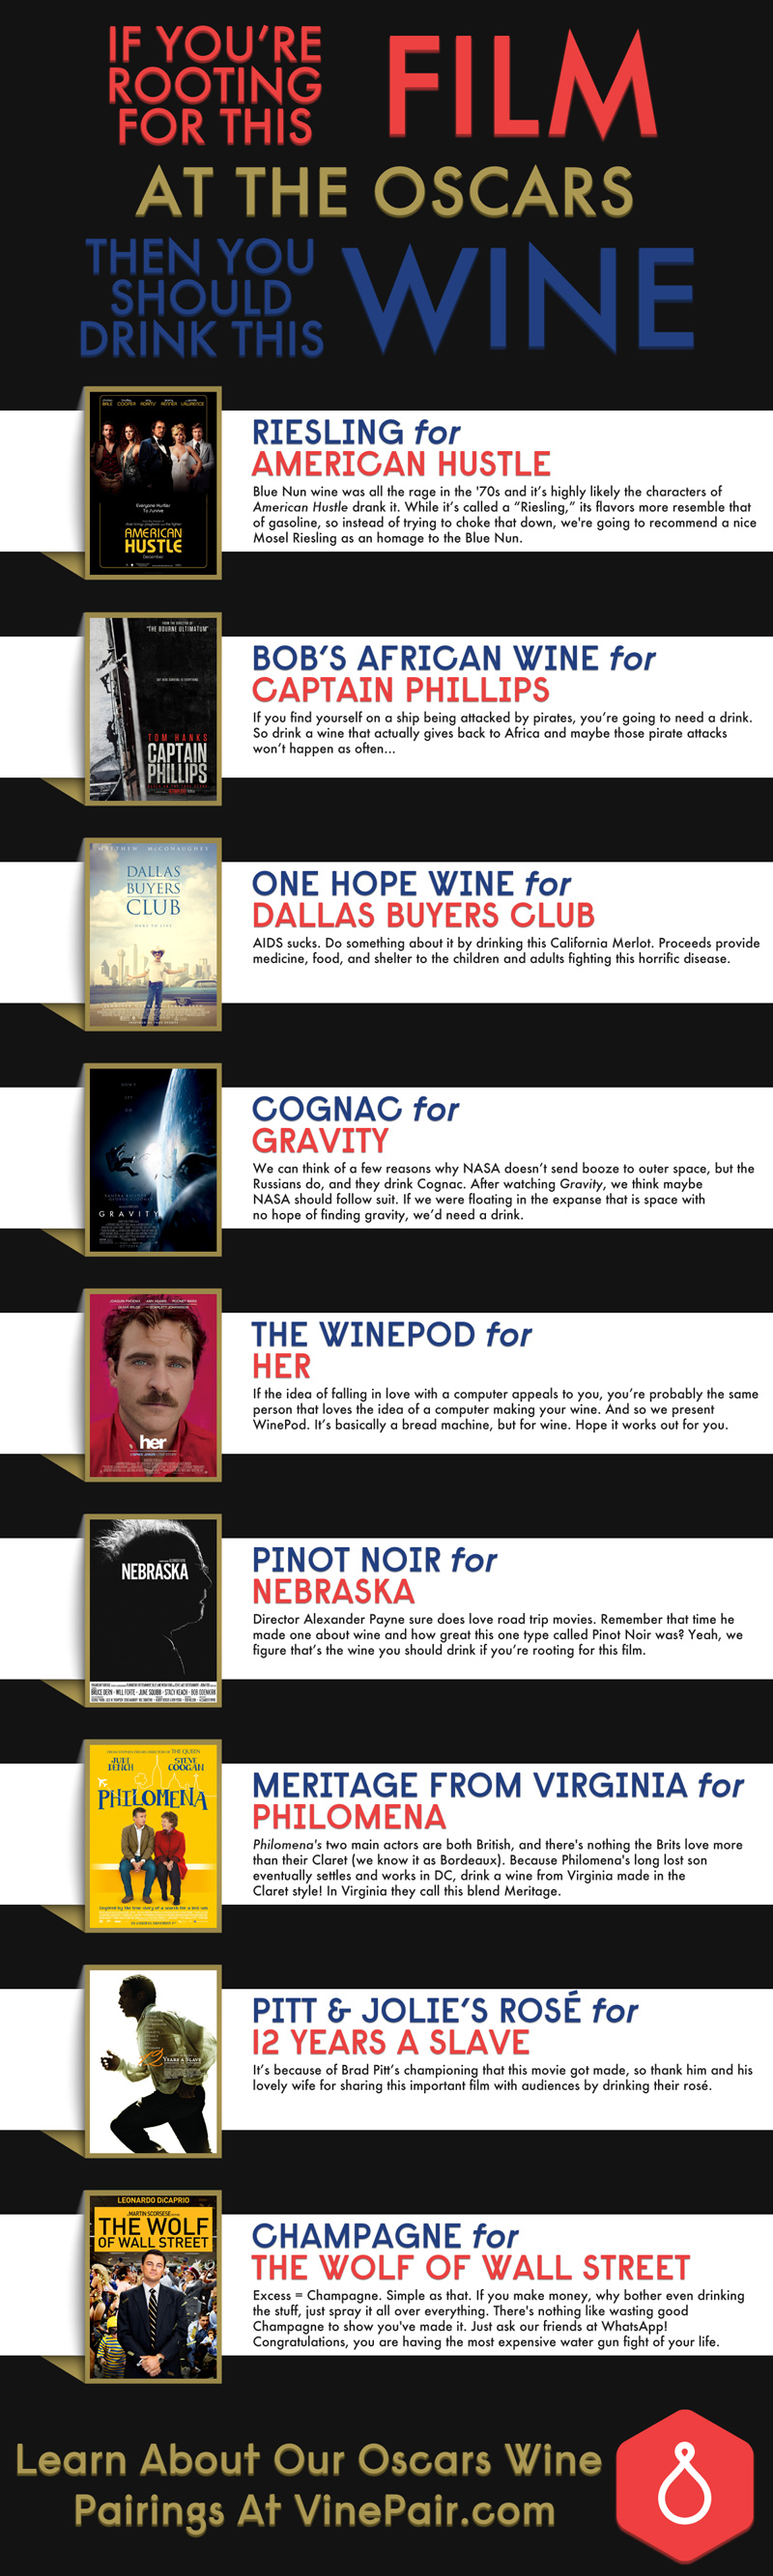 Wine Pairings For The 9 Best Picture Nominees - Oscars 2014